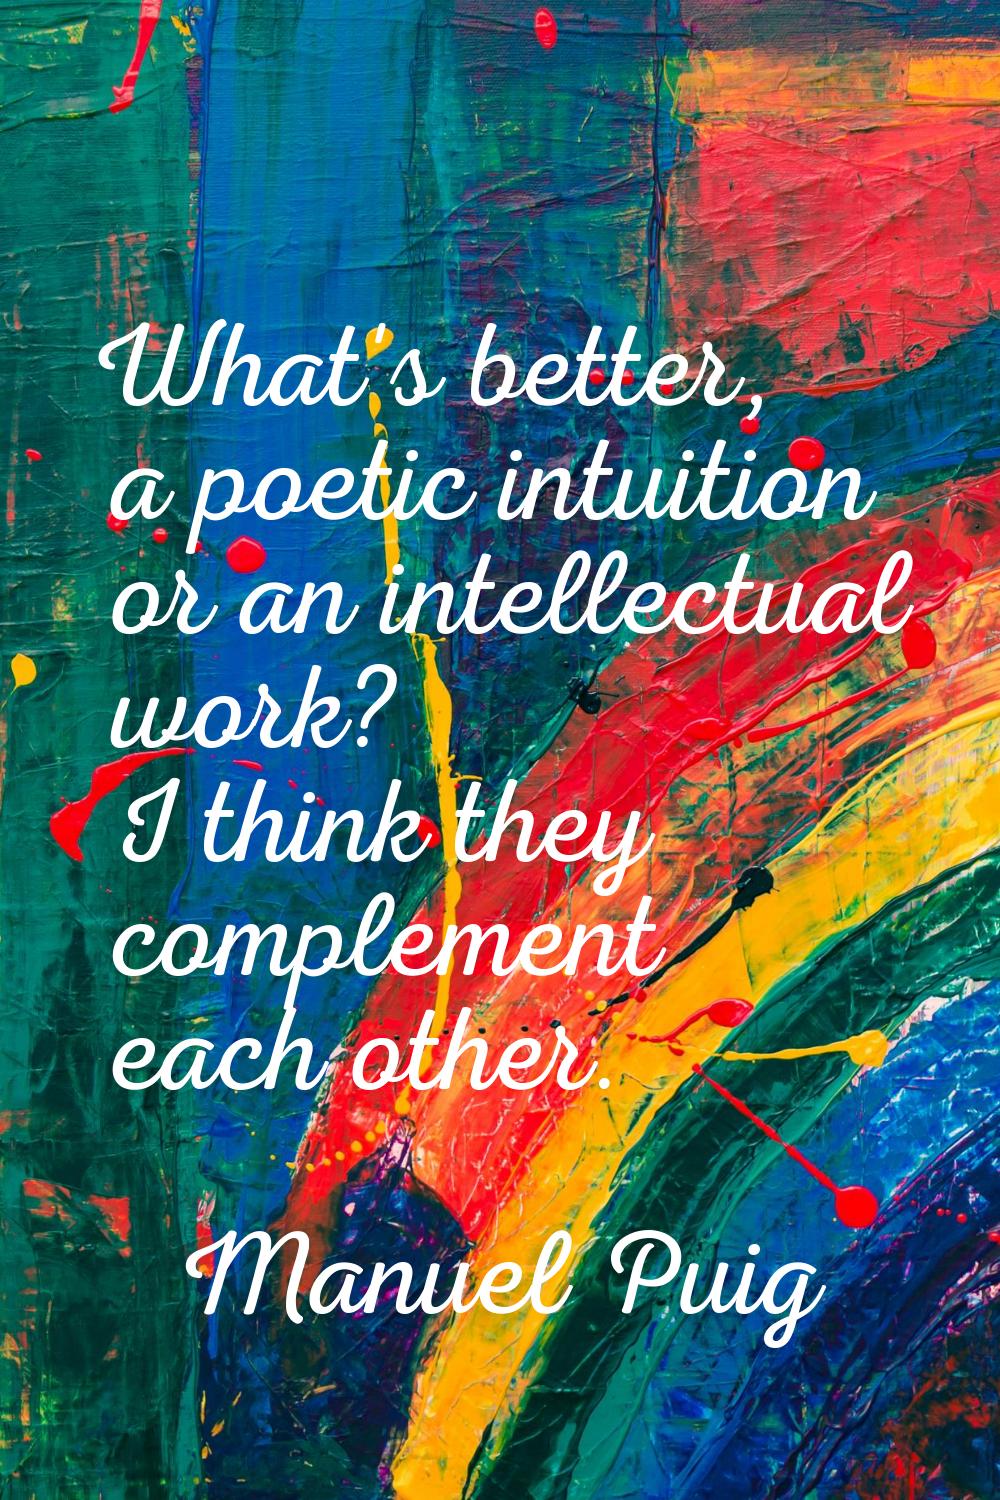 What's better, a poetic intuition or an intellectual work? I think they complement each other.